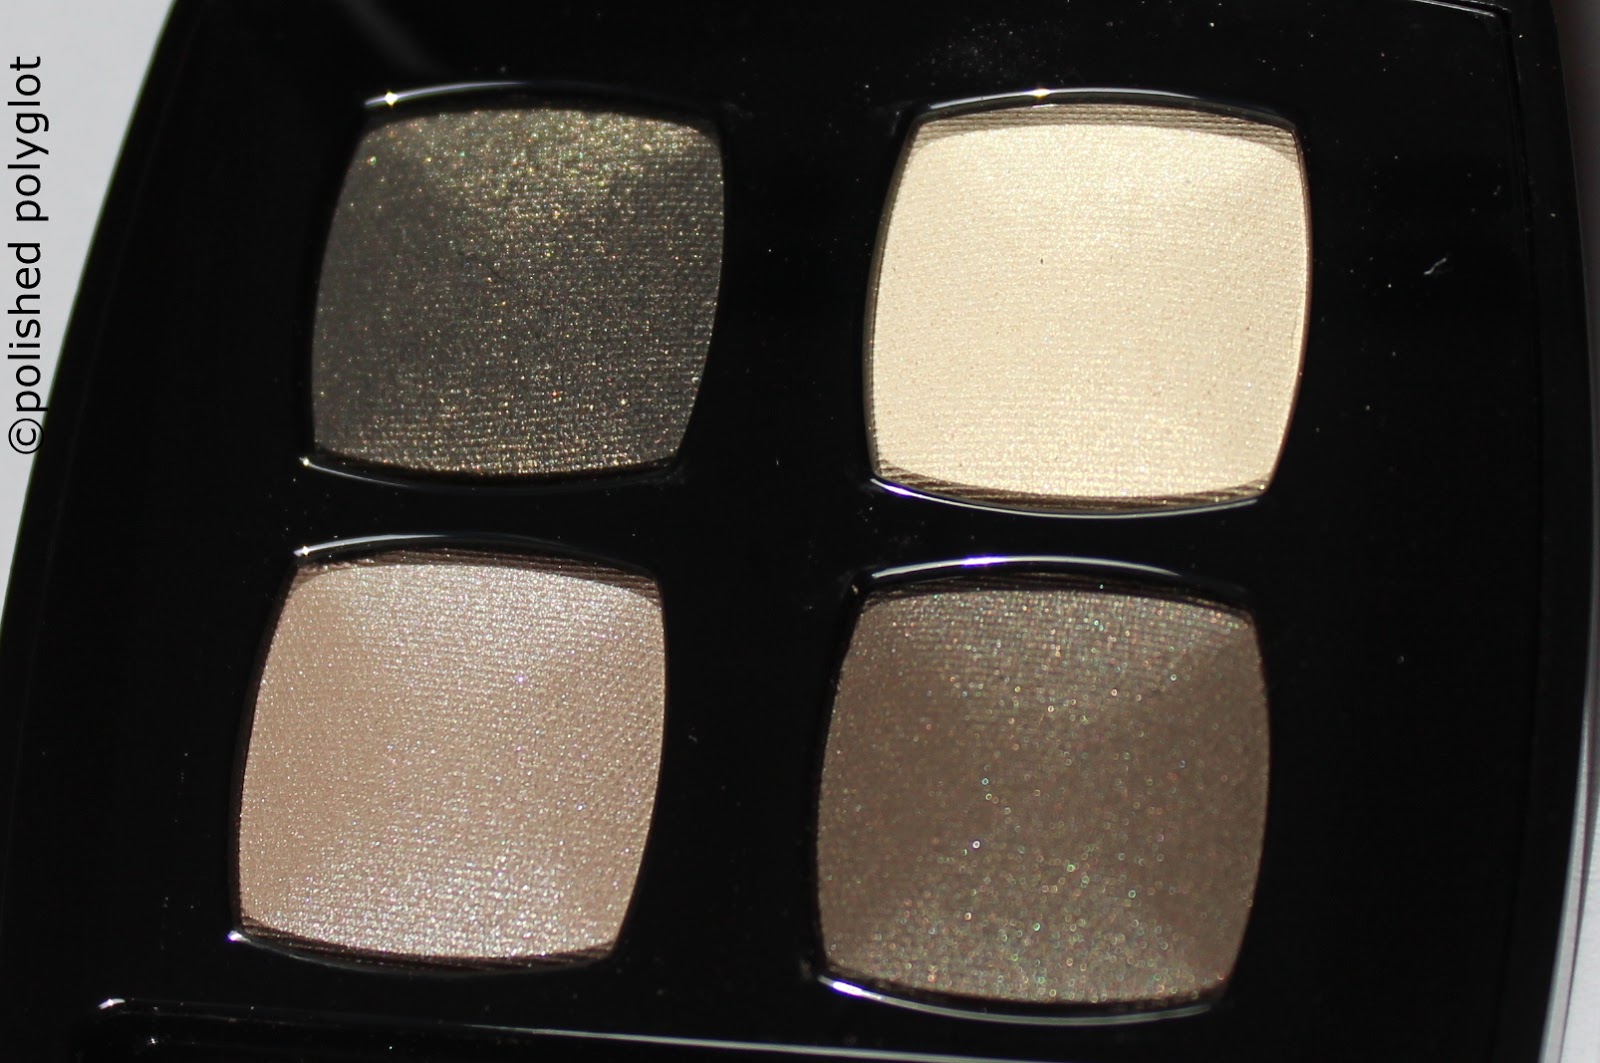 Fall Favourites: Chanel Les 4 ombres #43 Mystère & EOTD / Polished